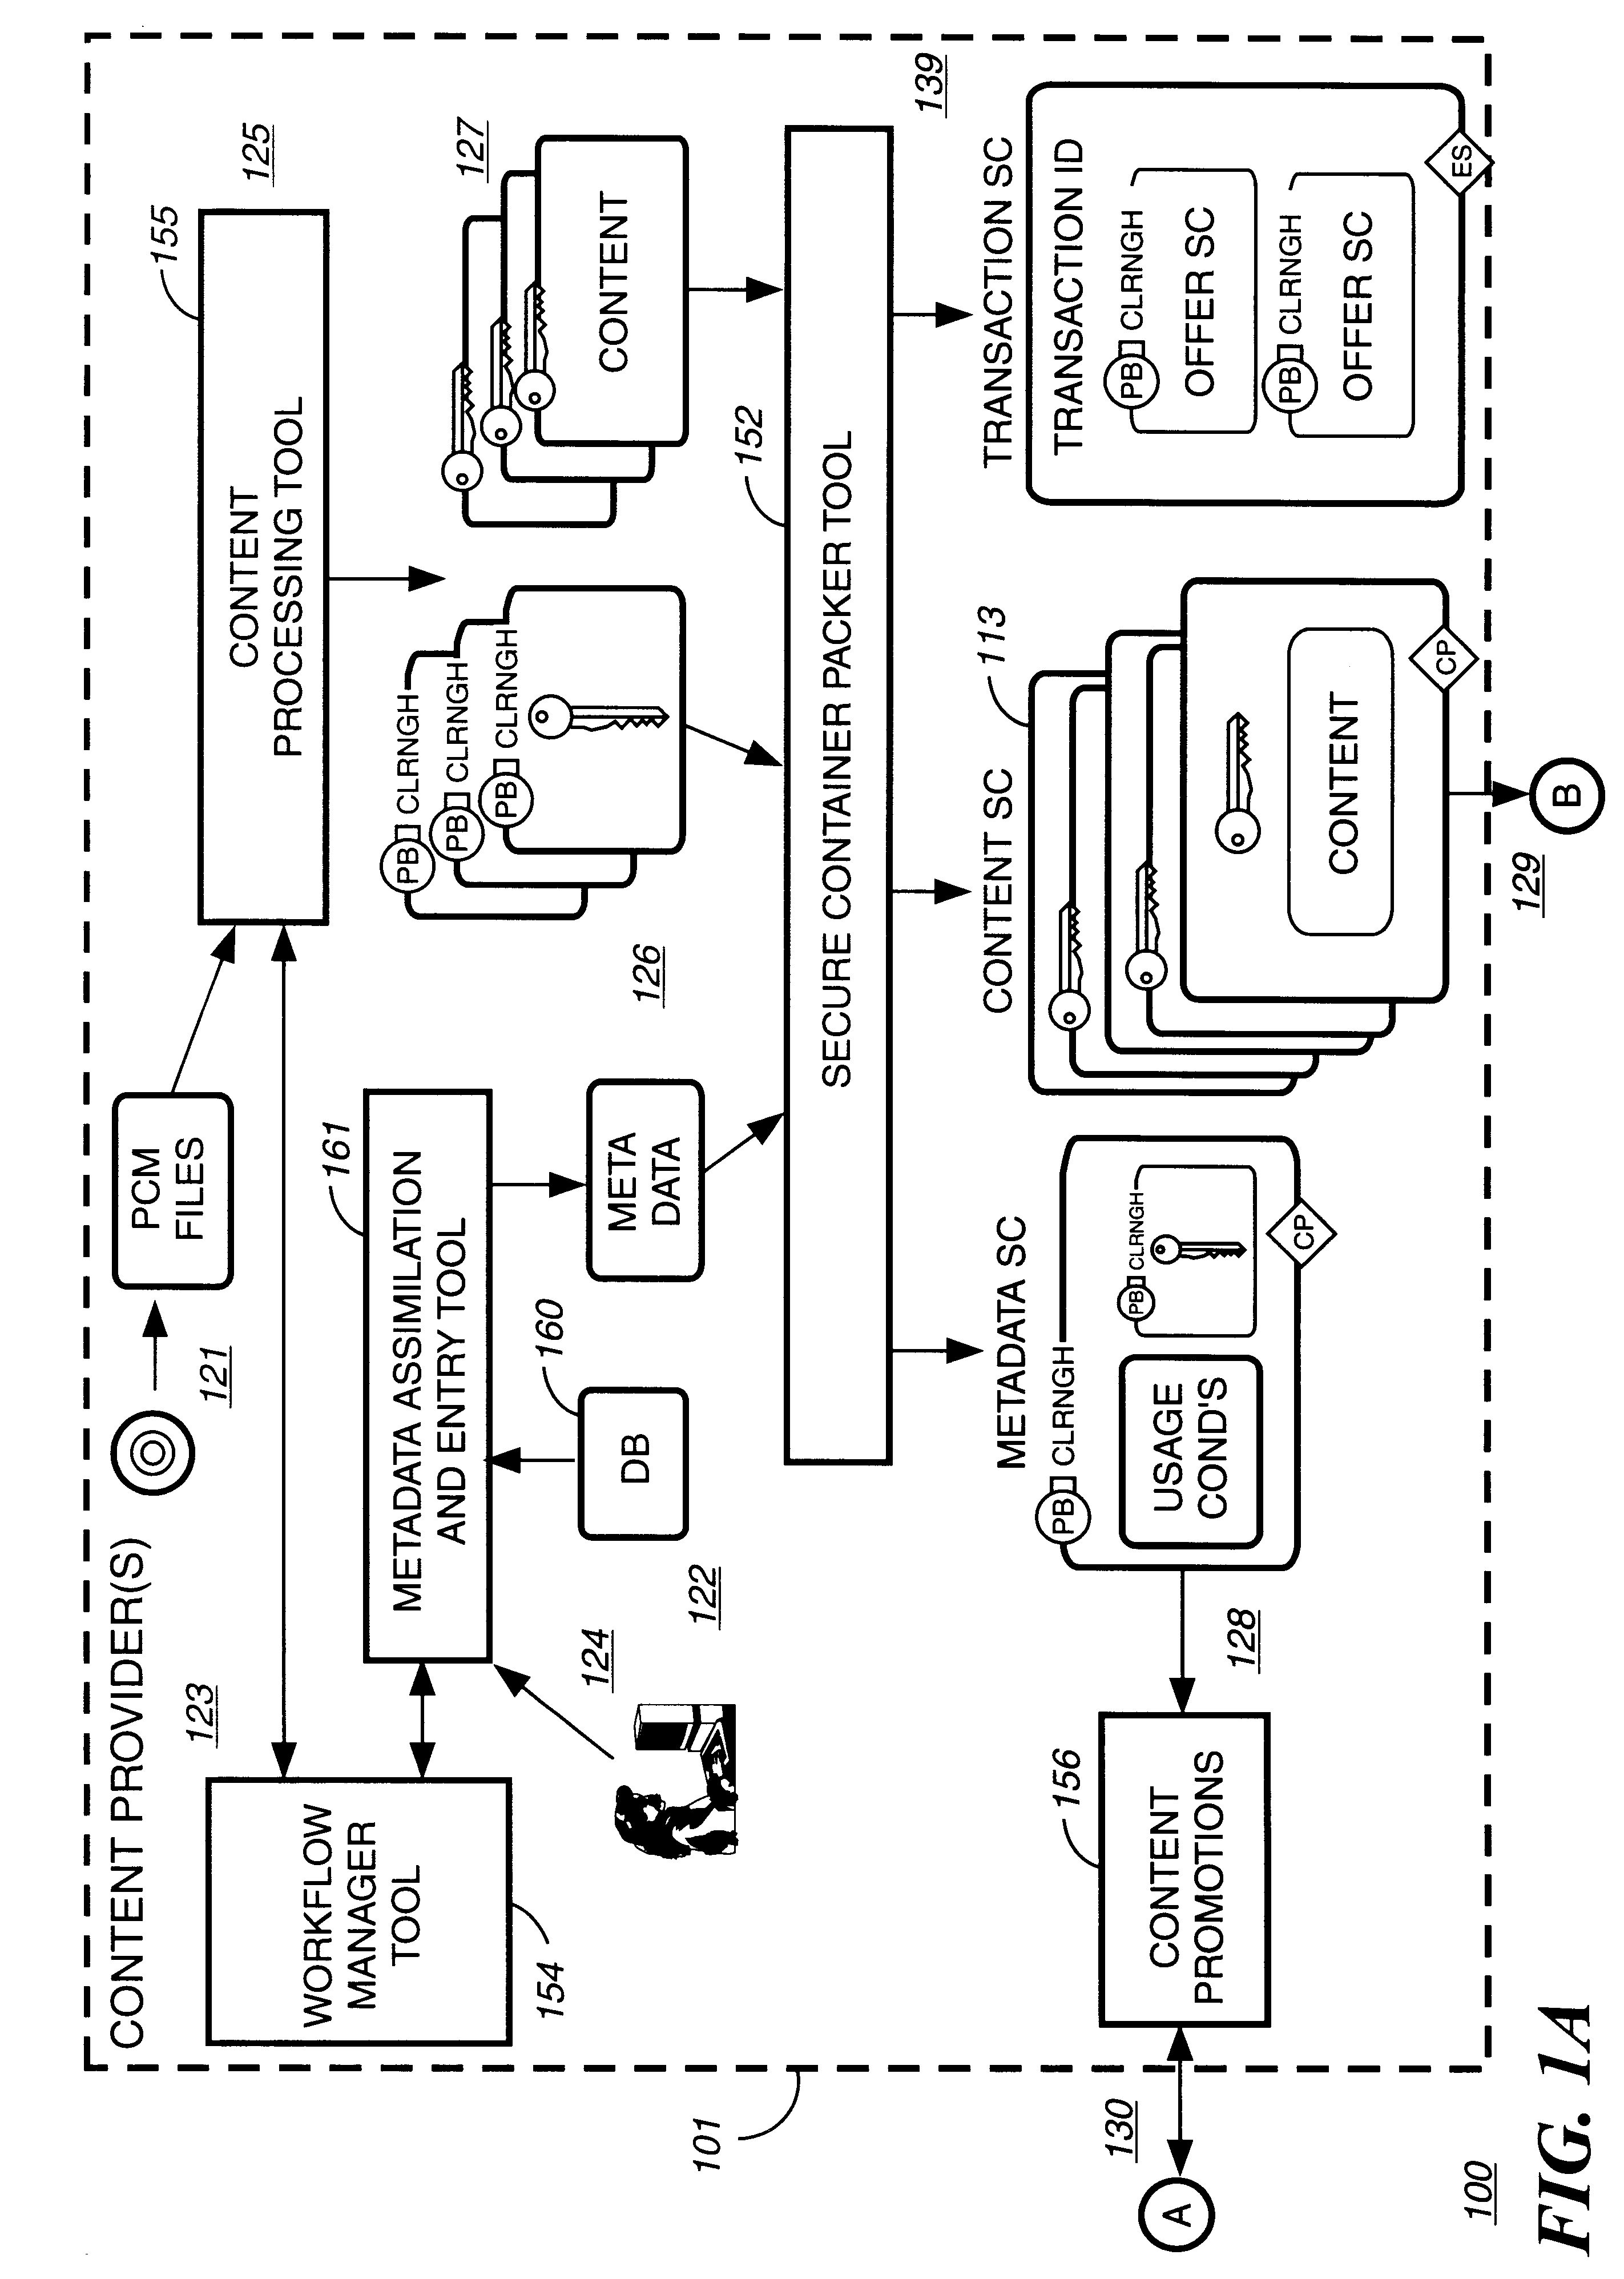 Method and apparatus to create encoded digital content